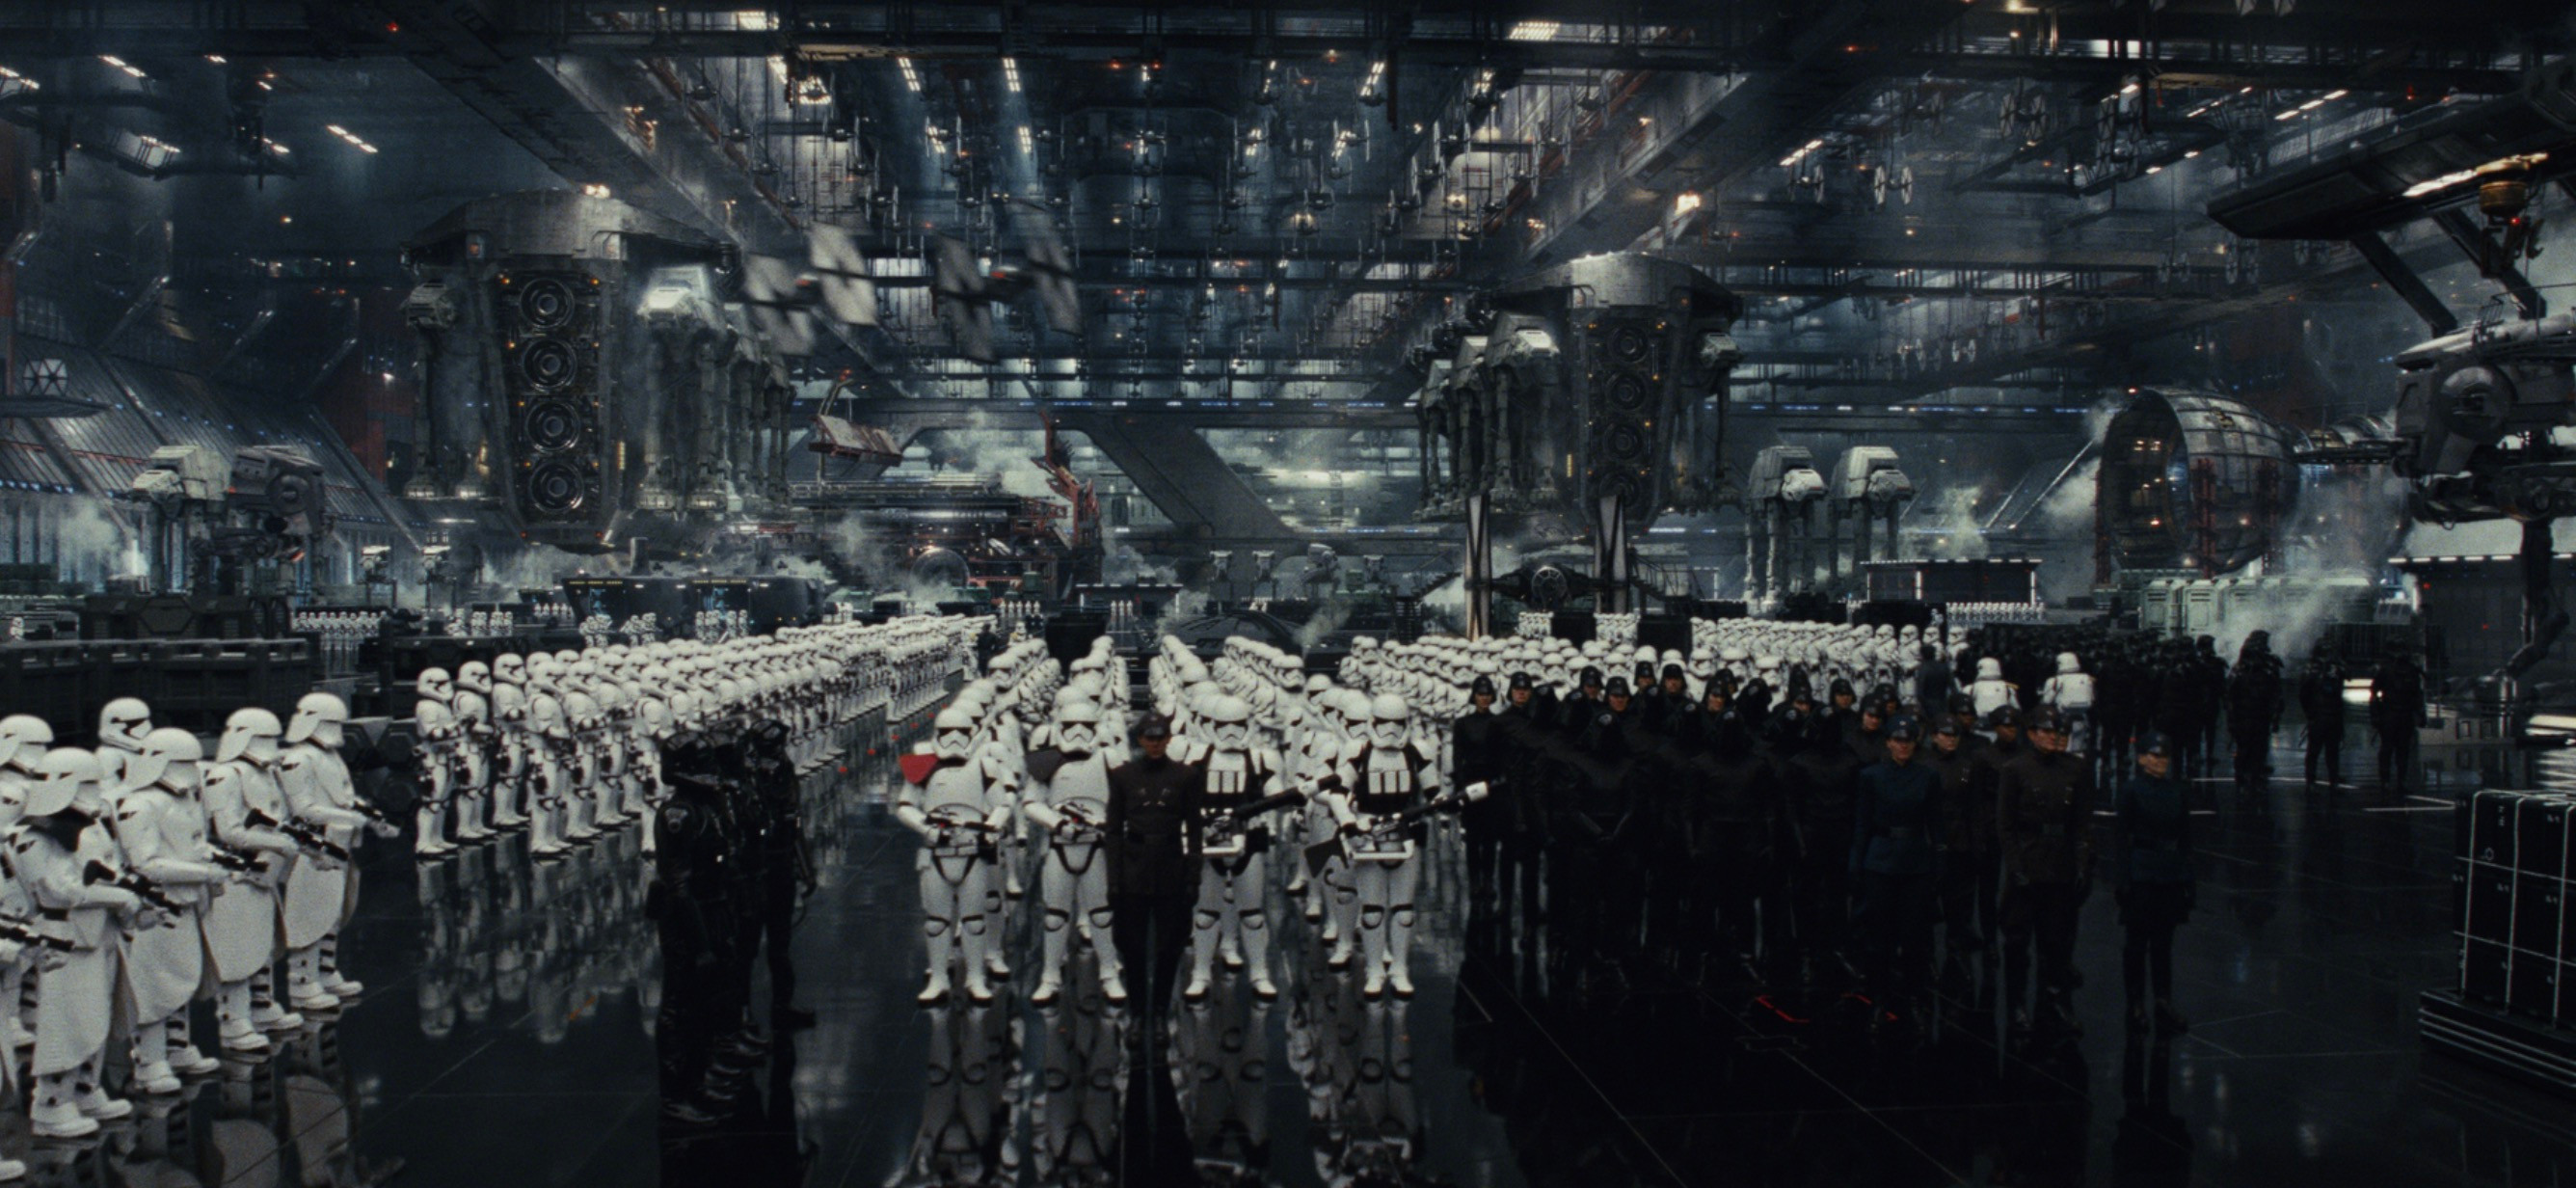 (Star Wars: The Last Jedi - ILM) First Order Hangar -Worked closely with generalists to make all modular Structural components, lots of set
dressing parts and ATAT Carrier